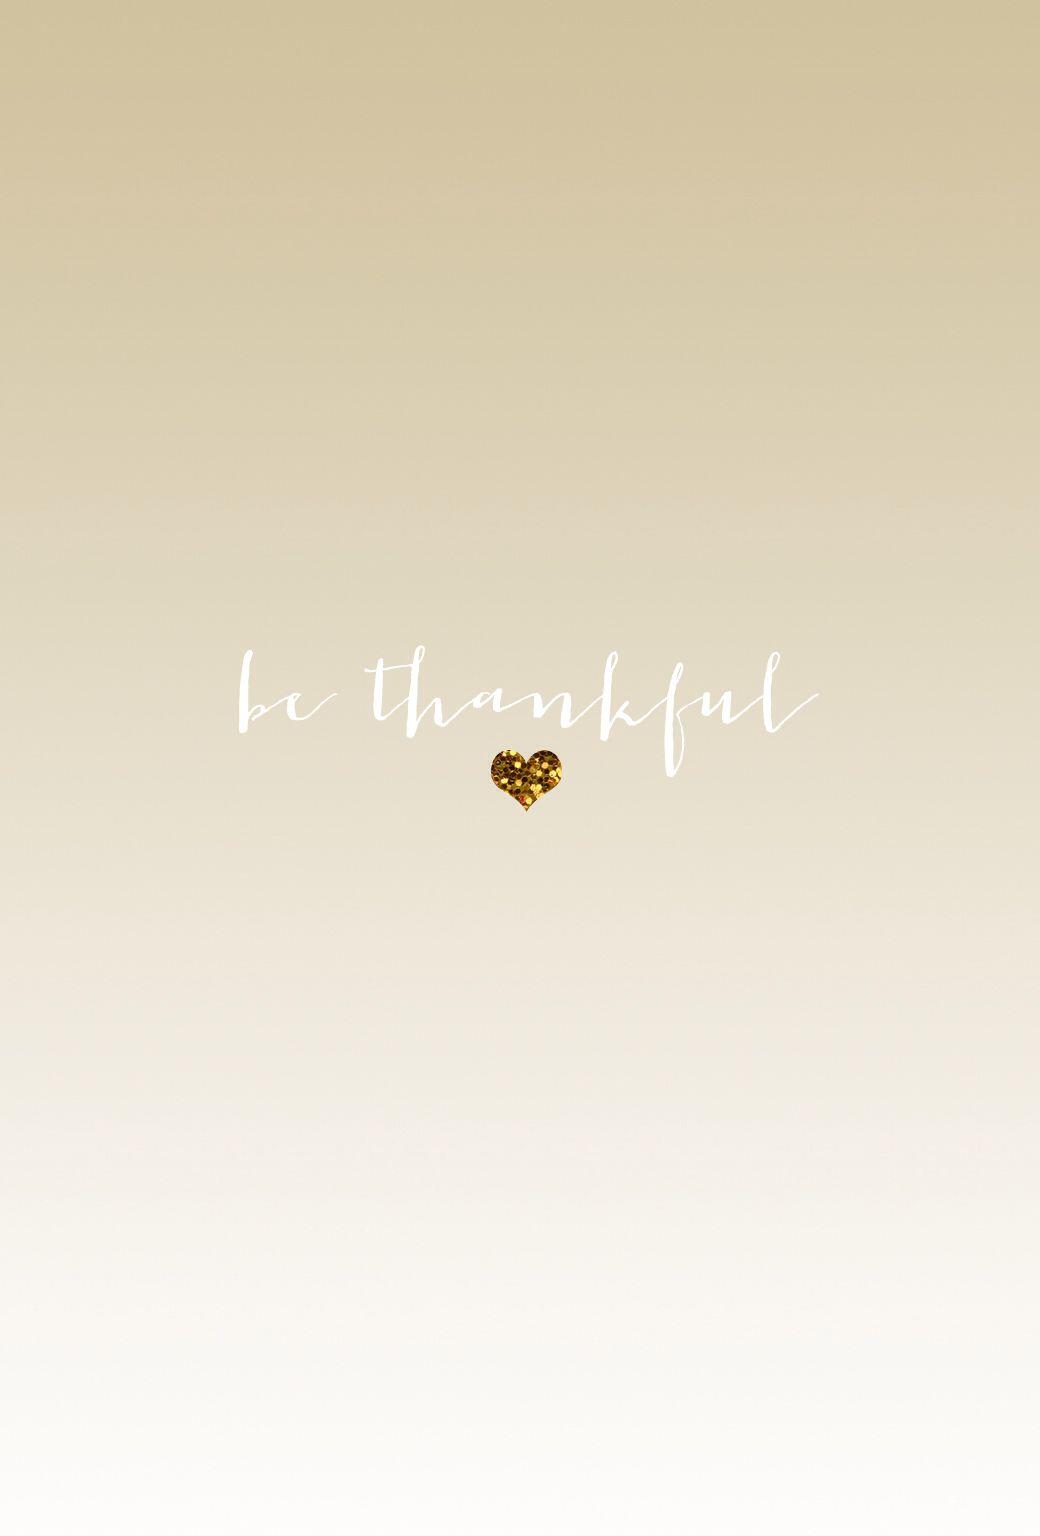 Be Thankful Wallpapers - Top Free Be Thankful Backgrounds - WallpaperAccess